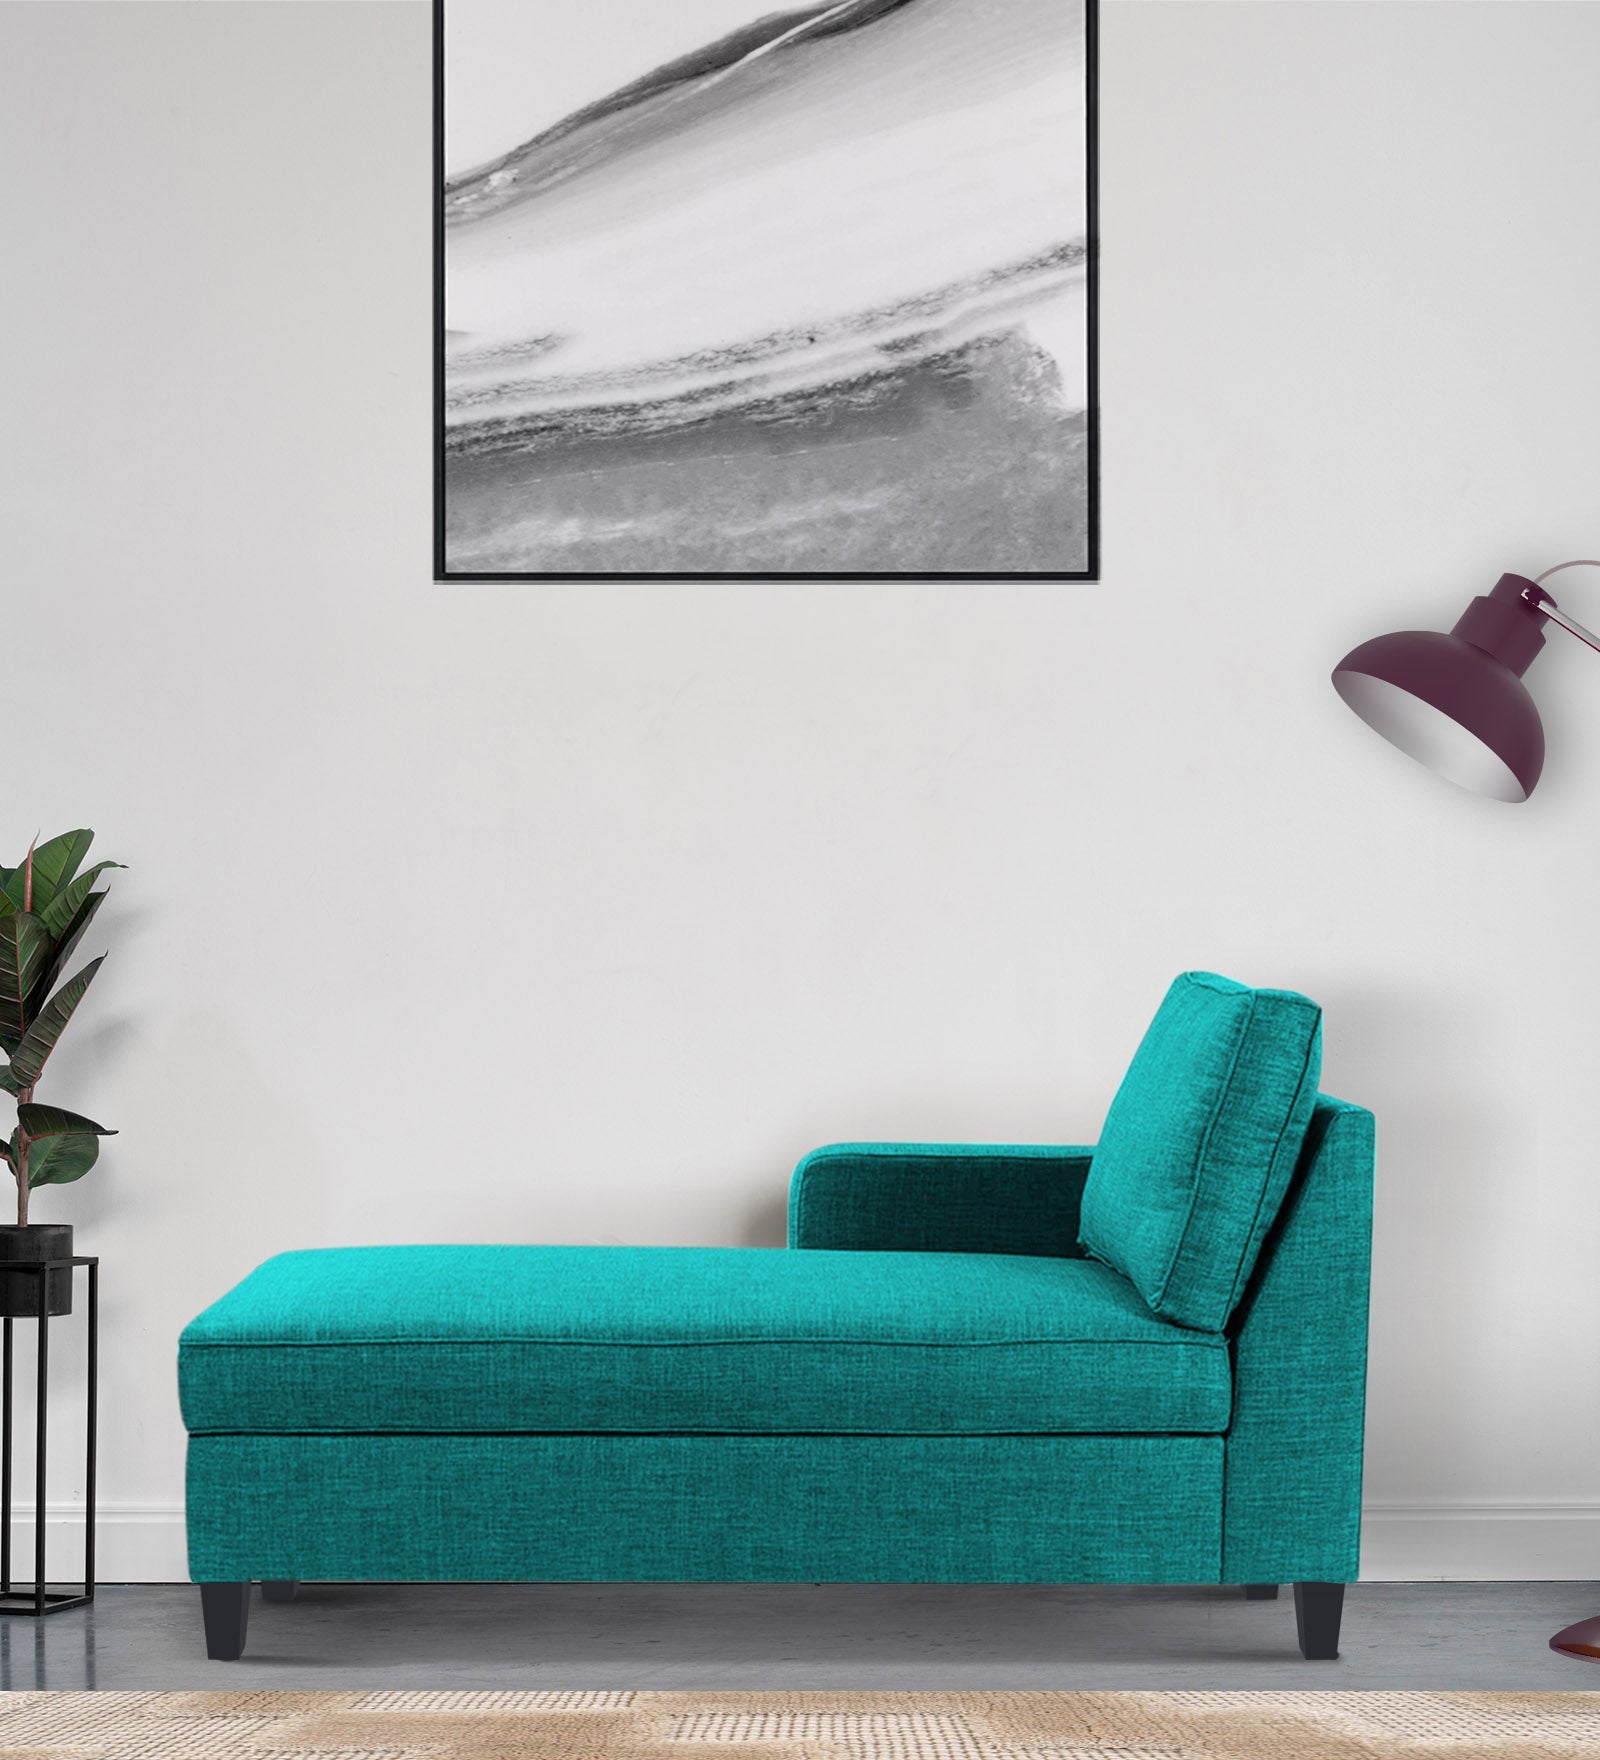 Harry Fabric LHS Chaise Lounger in Sea Green Colour